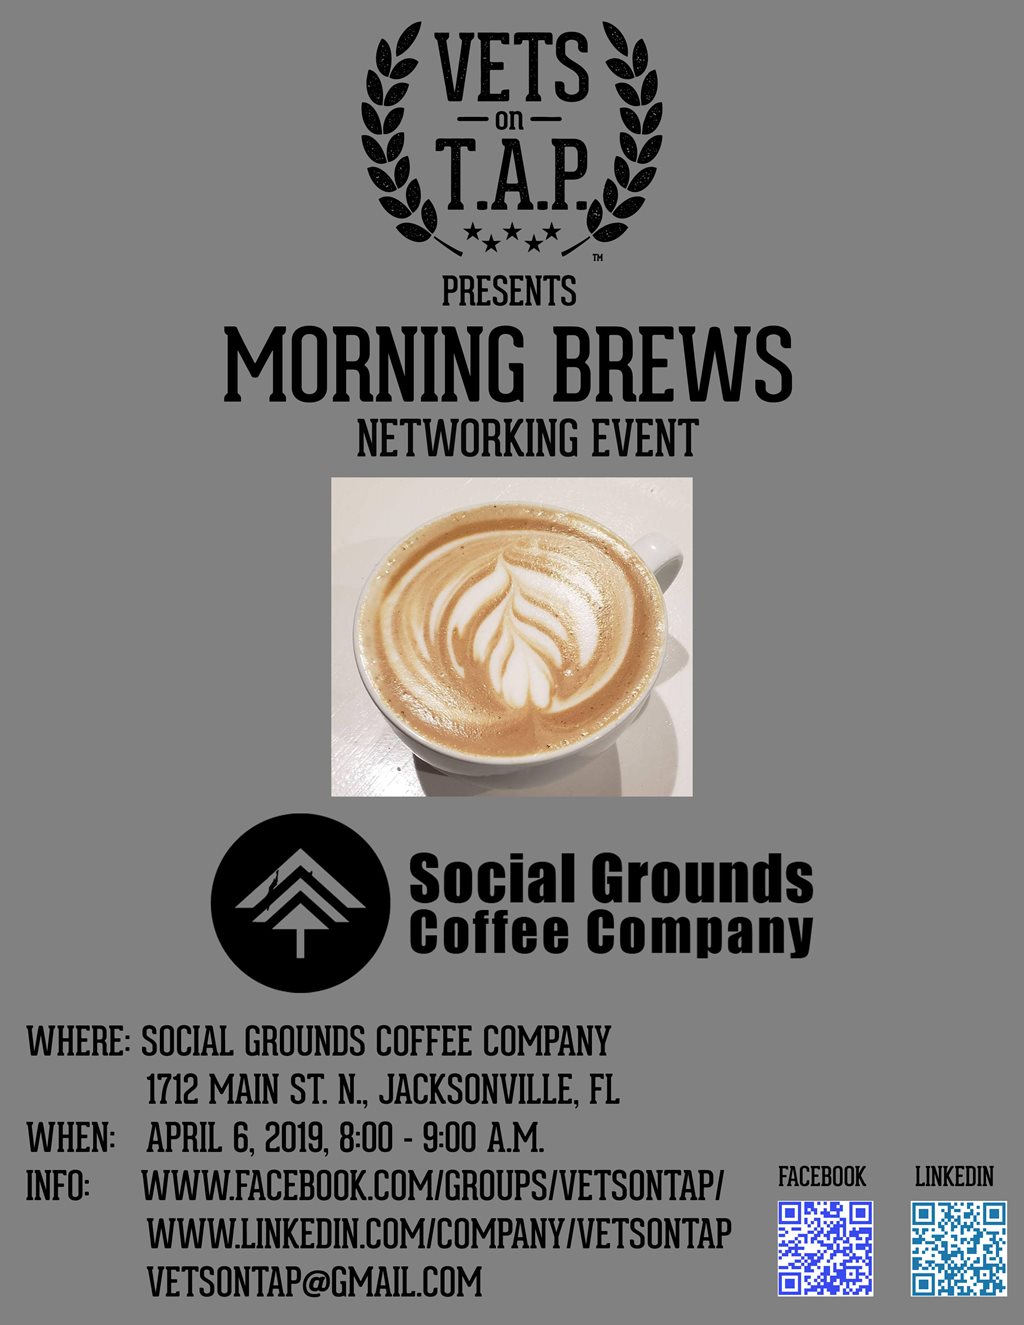 Vets on TAP presents a Morning Brews Networking Event at Social Grounds Coffee Company.